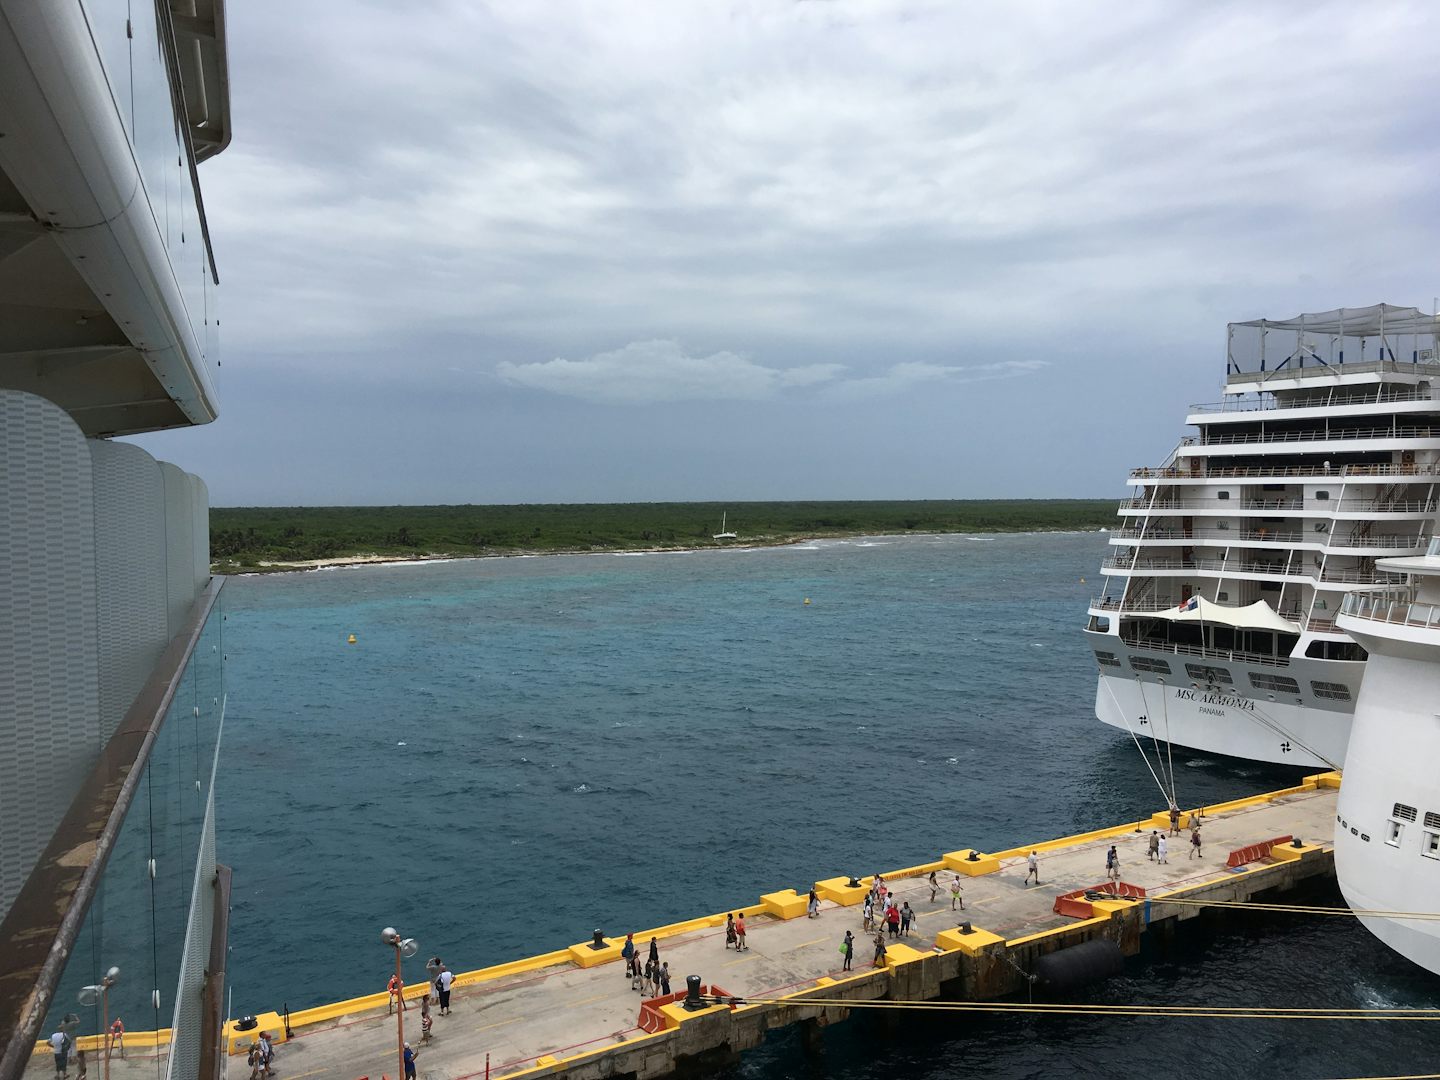 Costa Maya. Check out the distance to shore.